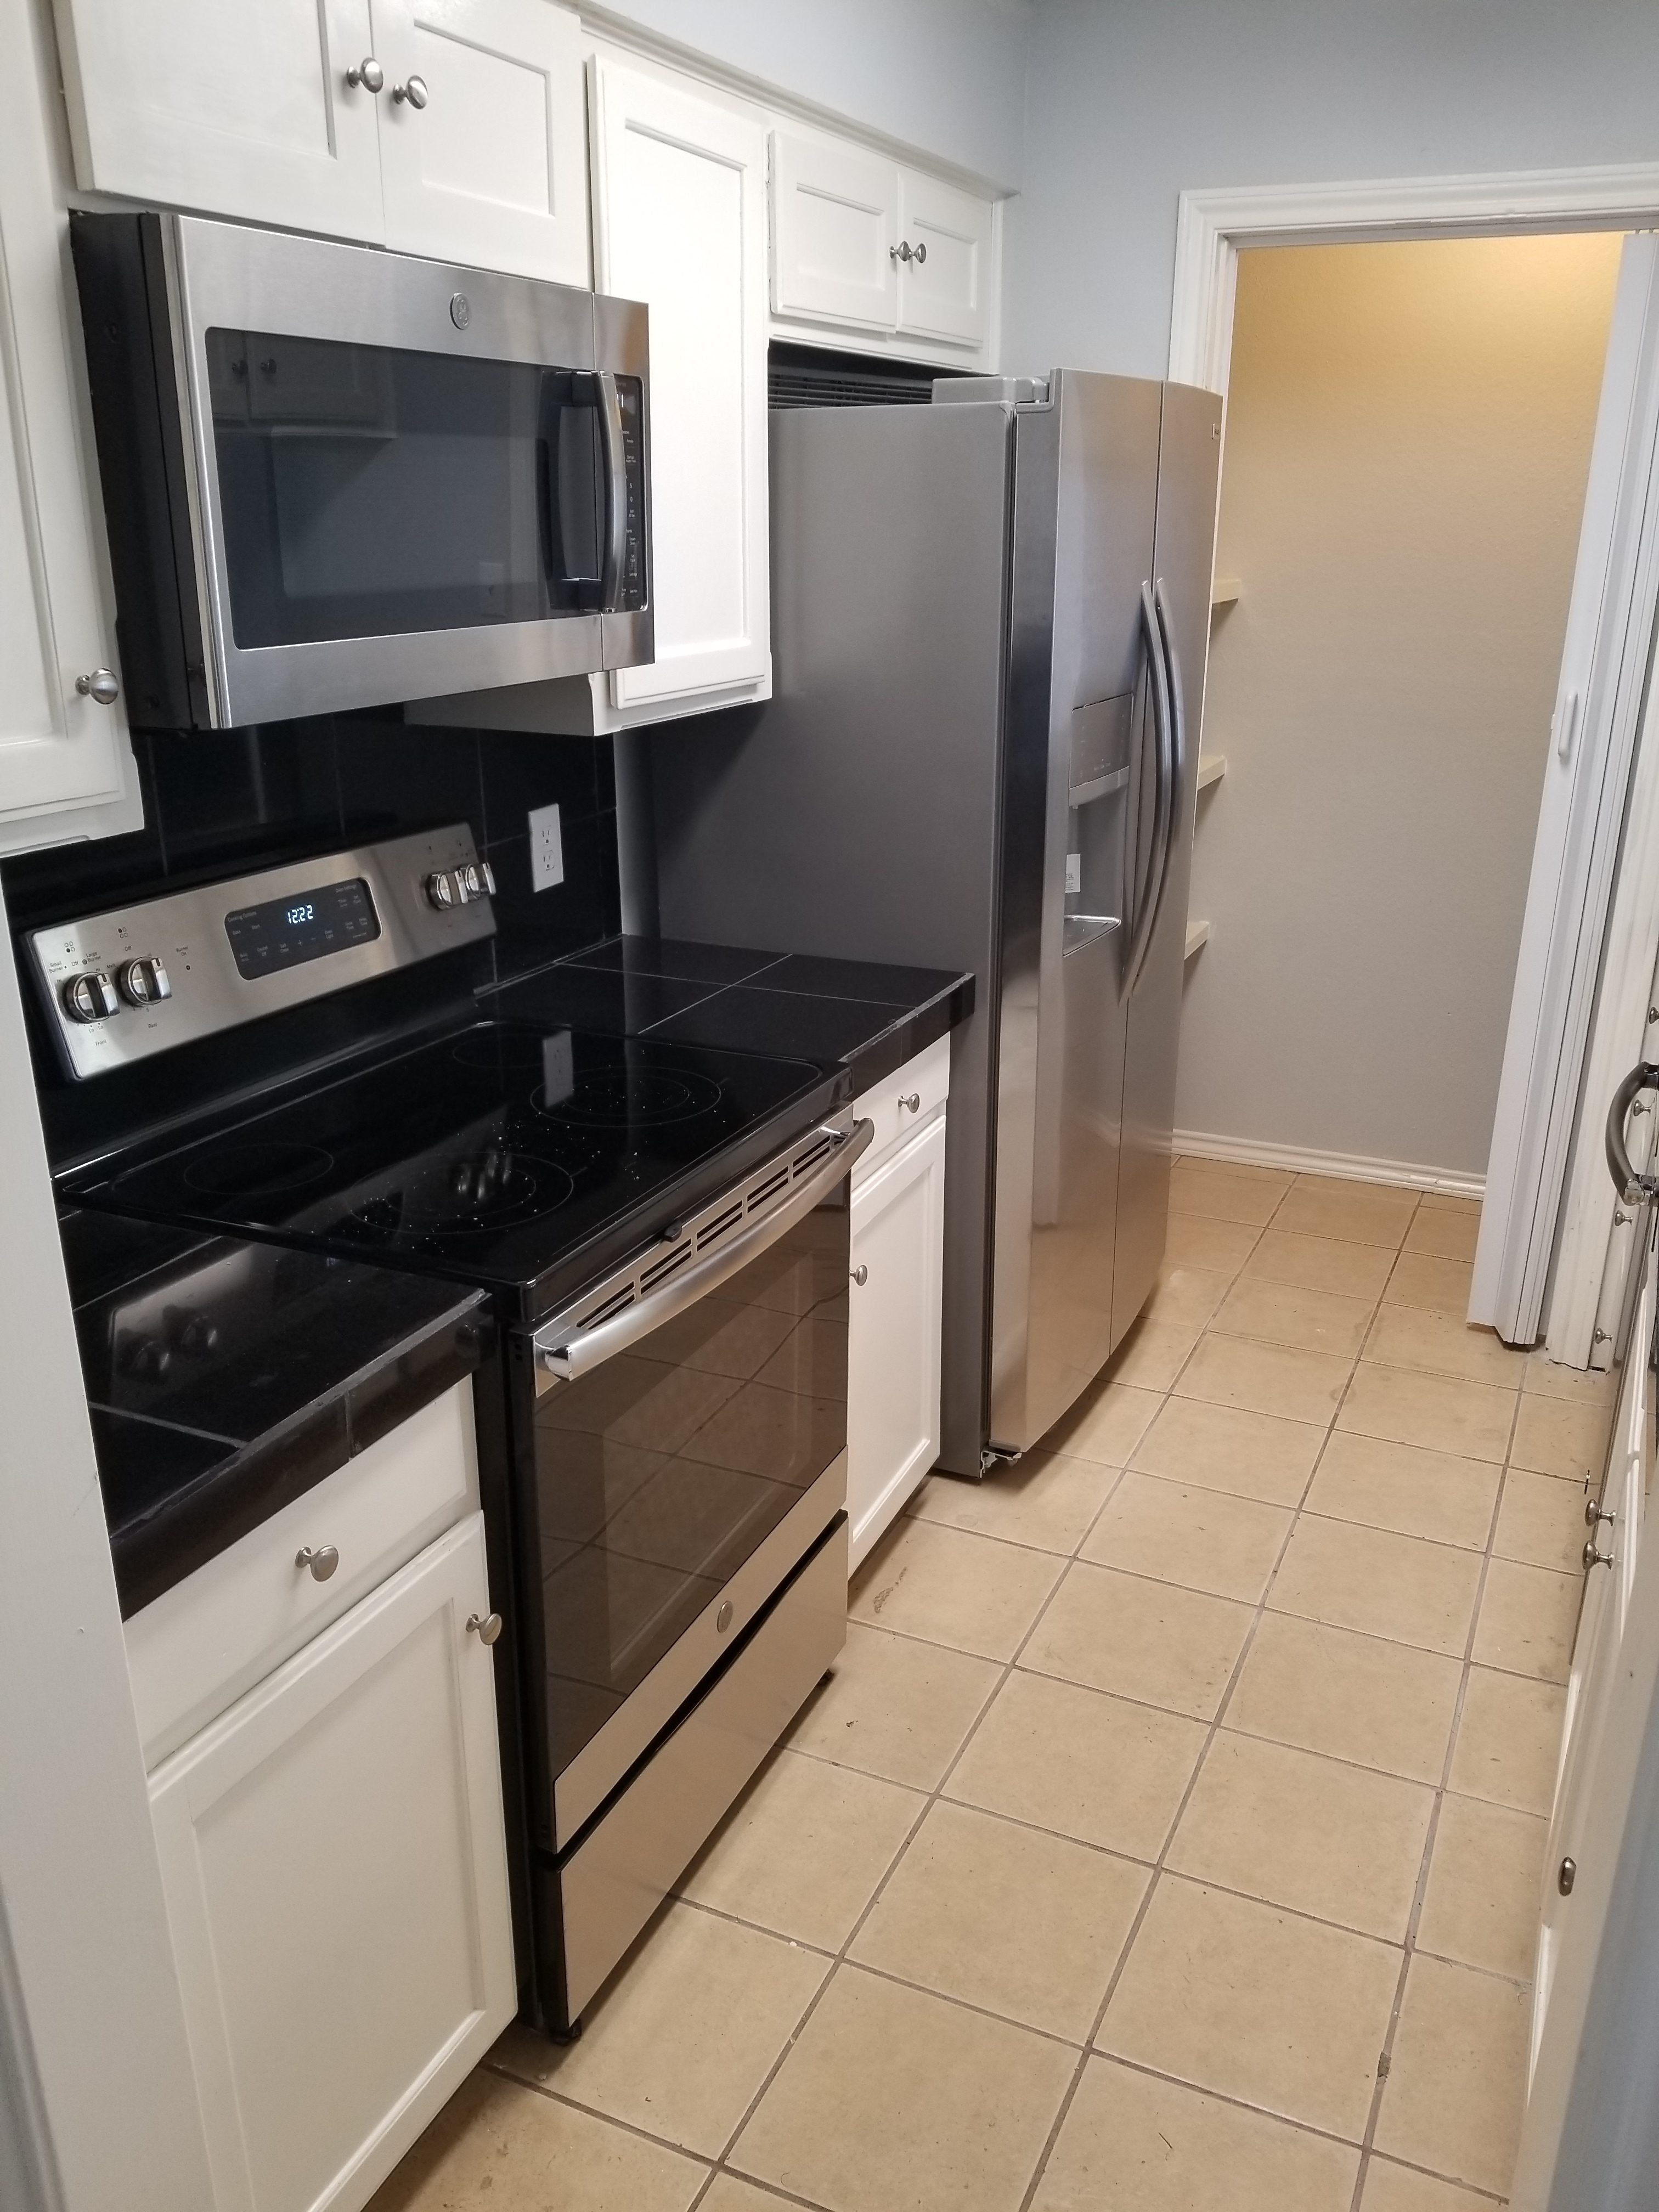 NEW APPLIANCES - LARGE PANTRY